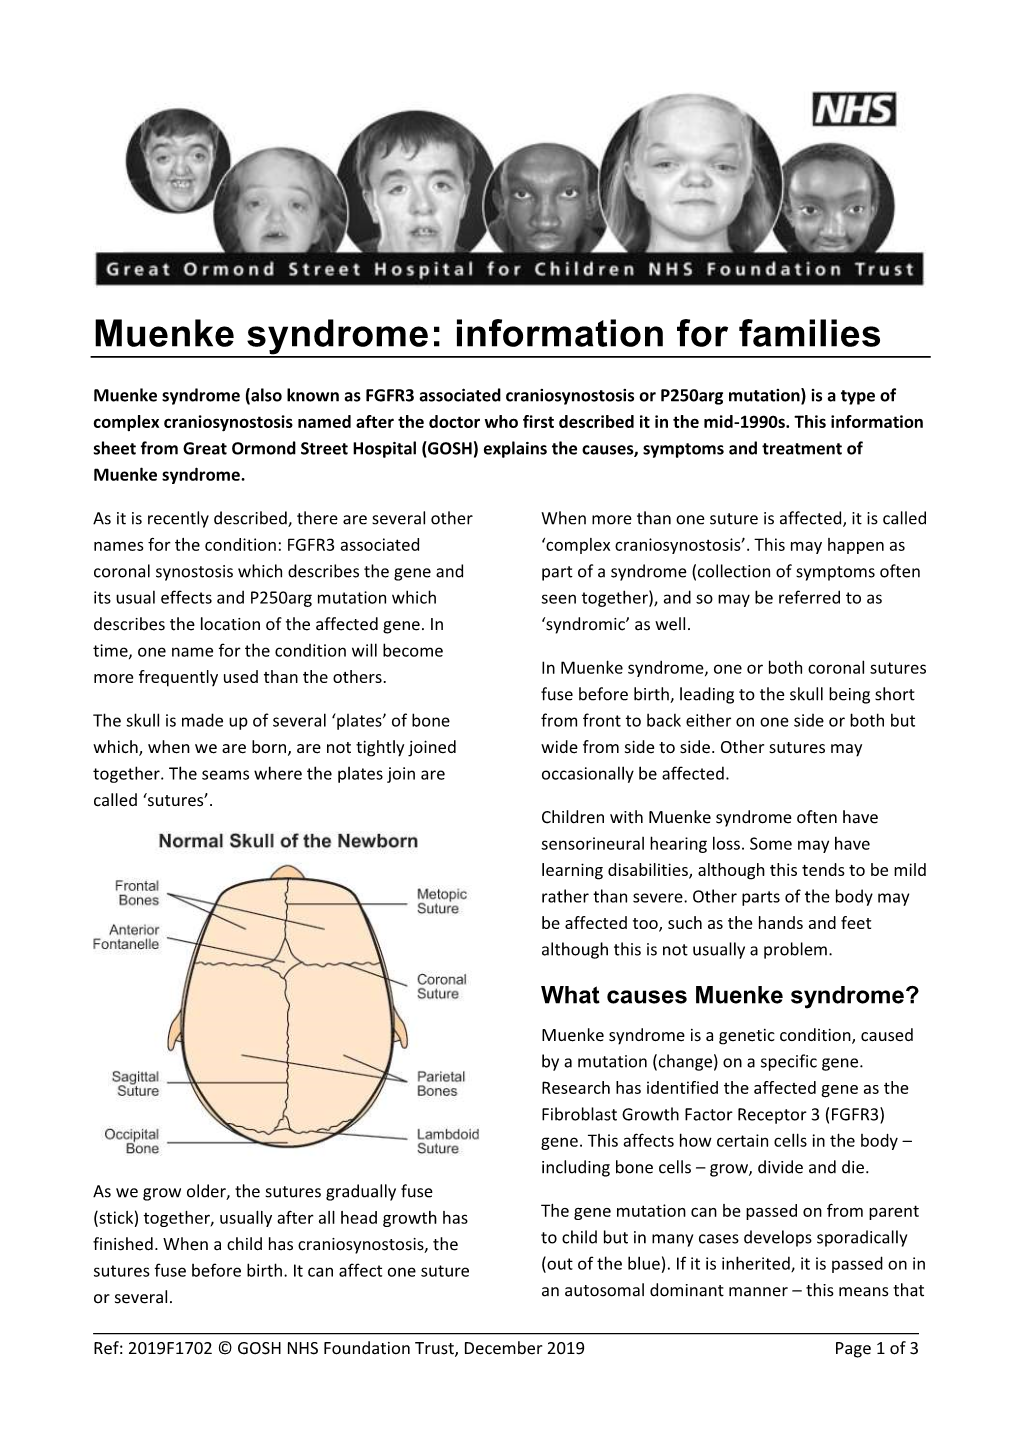 Muenke Syndrome: Information for Families